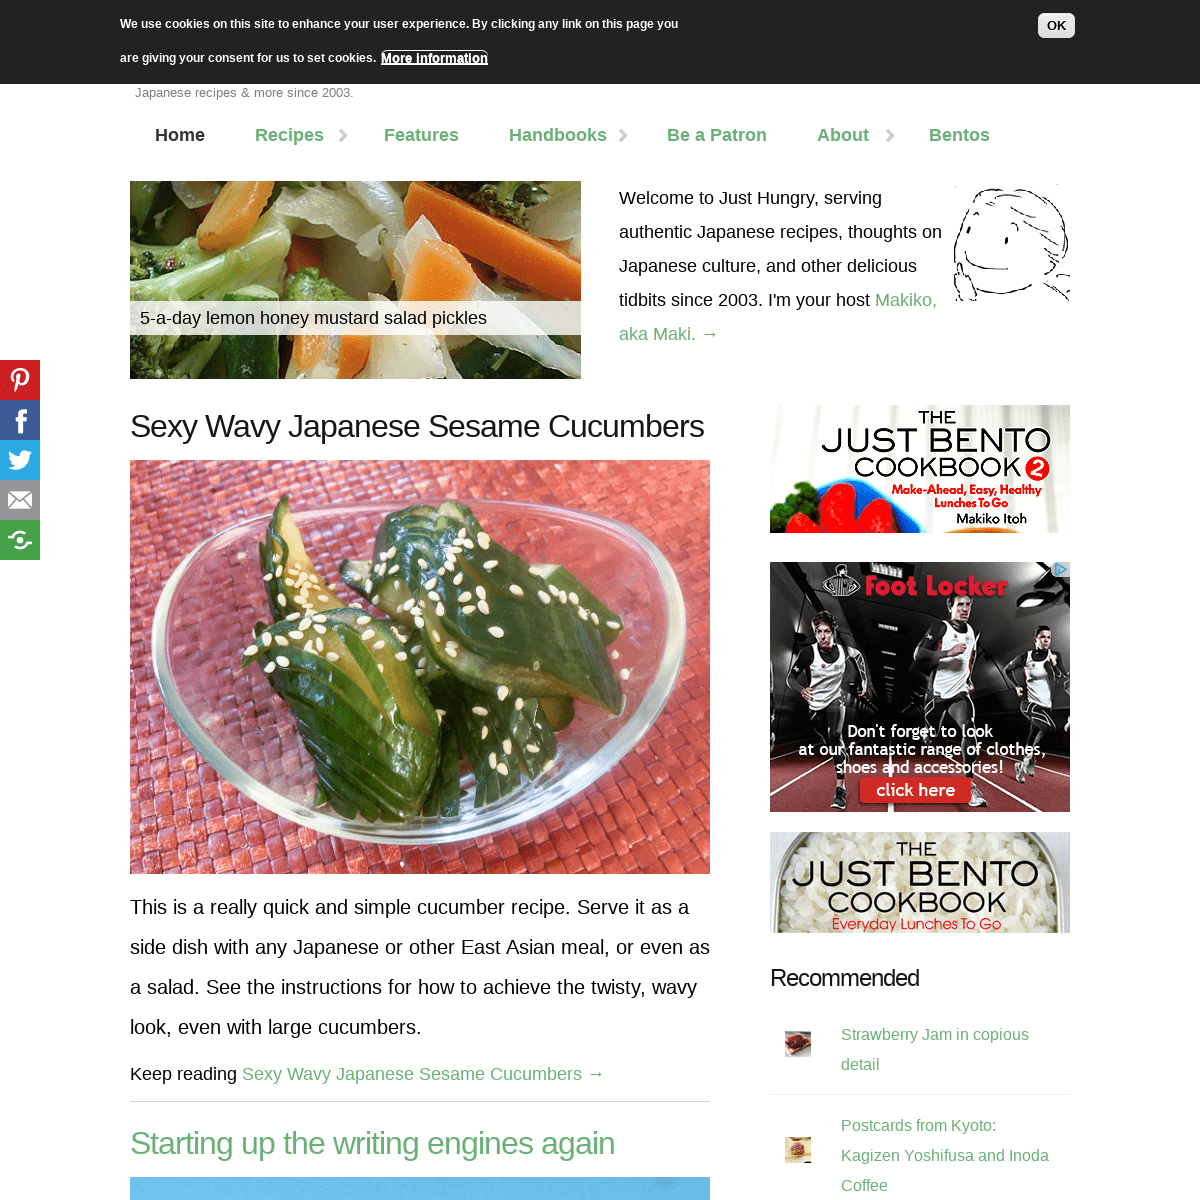 JustHungry | Japanese recipes & more since 2003.